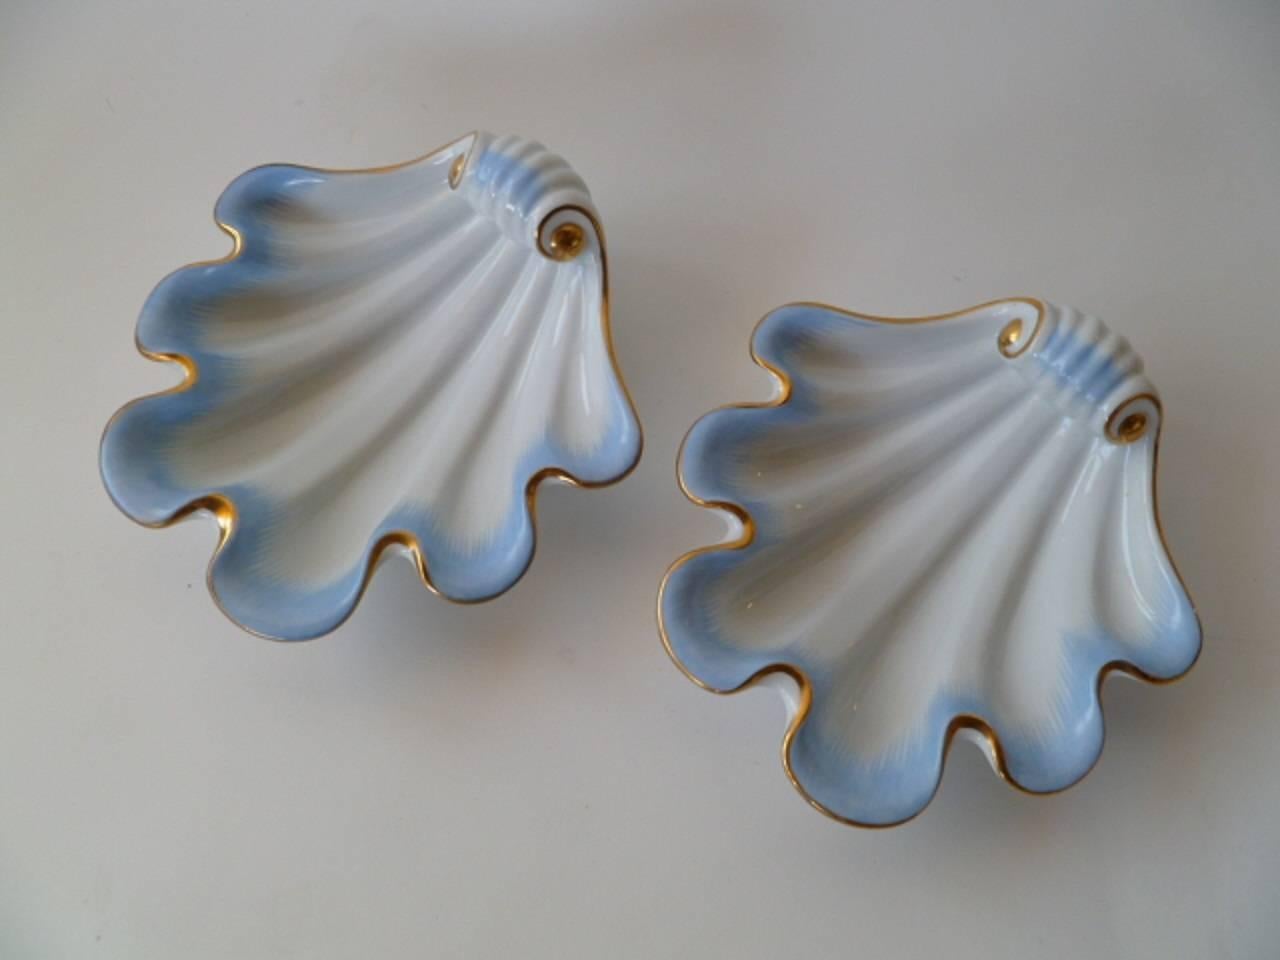 REDUCED FROM $750.
Wonderful pair of Herend pre-war late 1930s shell vessels created by the famous porcelain maker in Hungary. The company started in 1838 producing high quality porcelain pieces for royalty and well-to-do clients. These particular